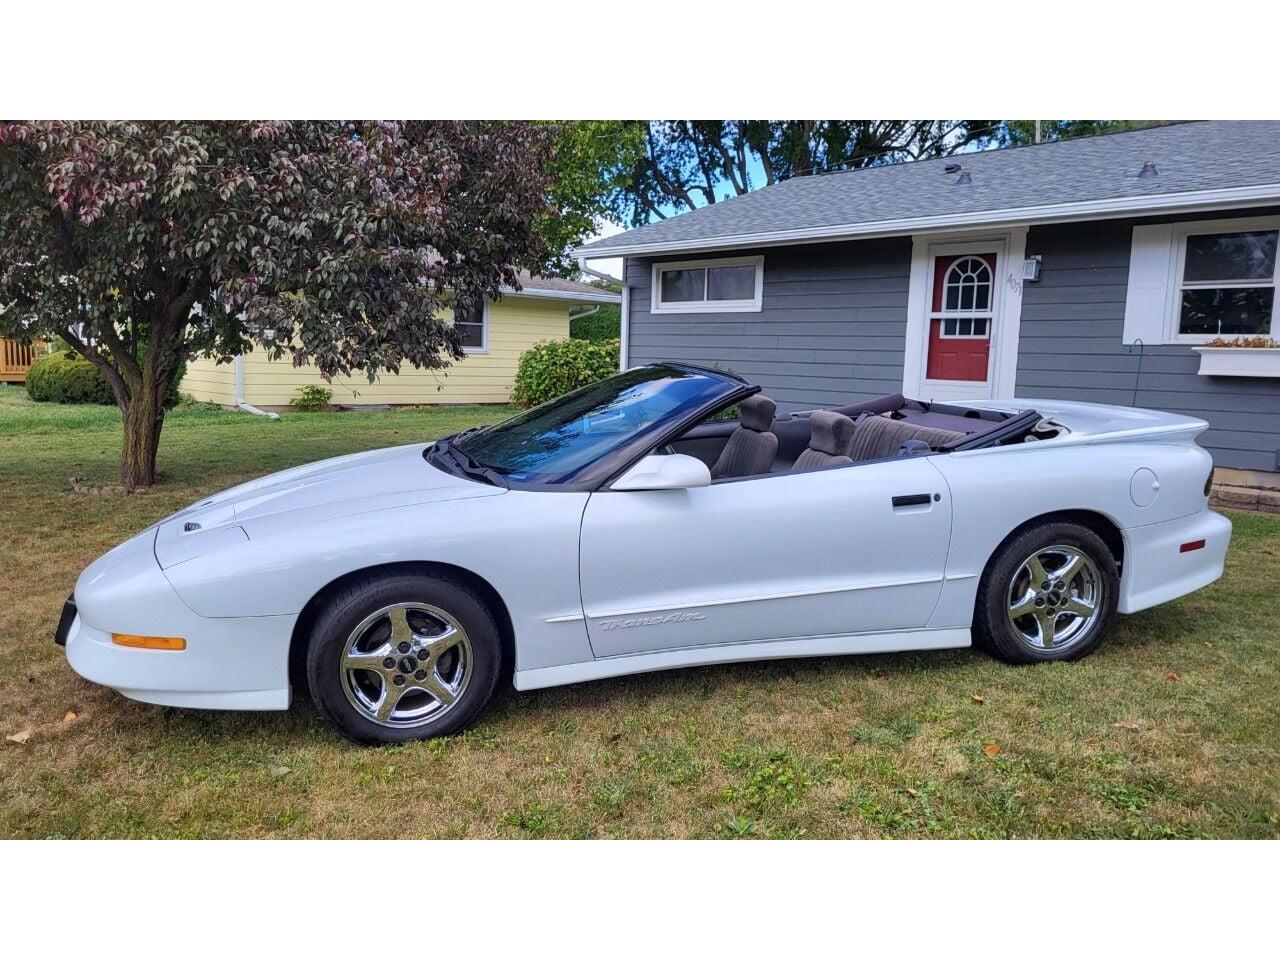 For Sale: 1995 Pontiac Firebird in Stanley, Wisconsin for sale in Stanley, WI